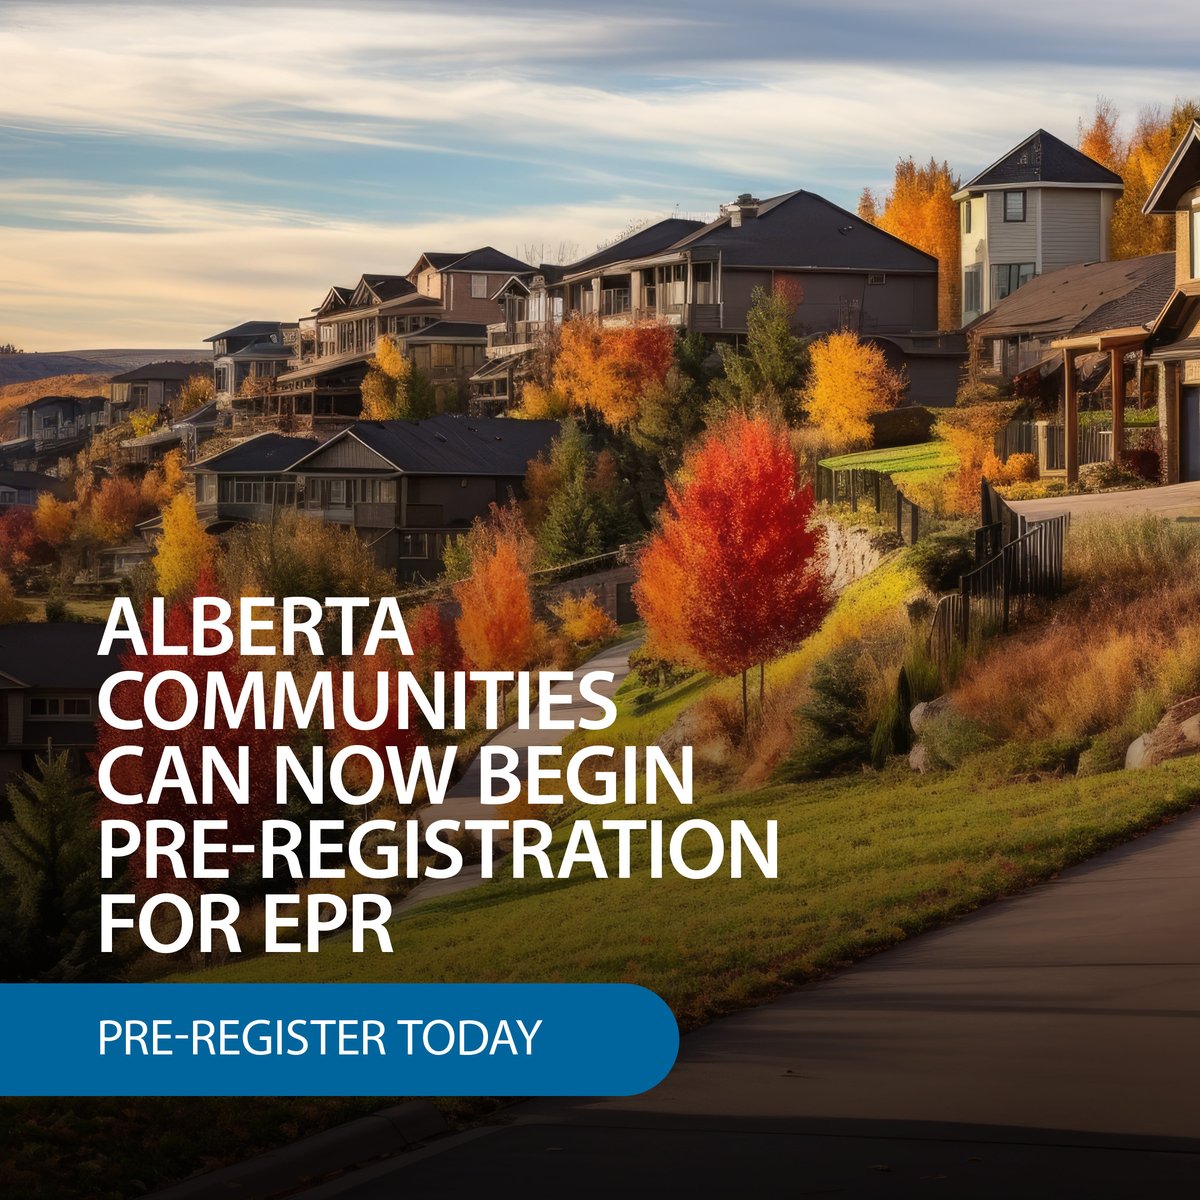 Communities throughout #Alberta can now pre-register for Extended Producer Responsibility and begin the process of thinking about recycling differently. bit.ly/3LEicwP #EPR #Municipalities #Recycling #FutureWithoutWaste #CircularEconomy